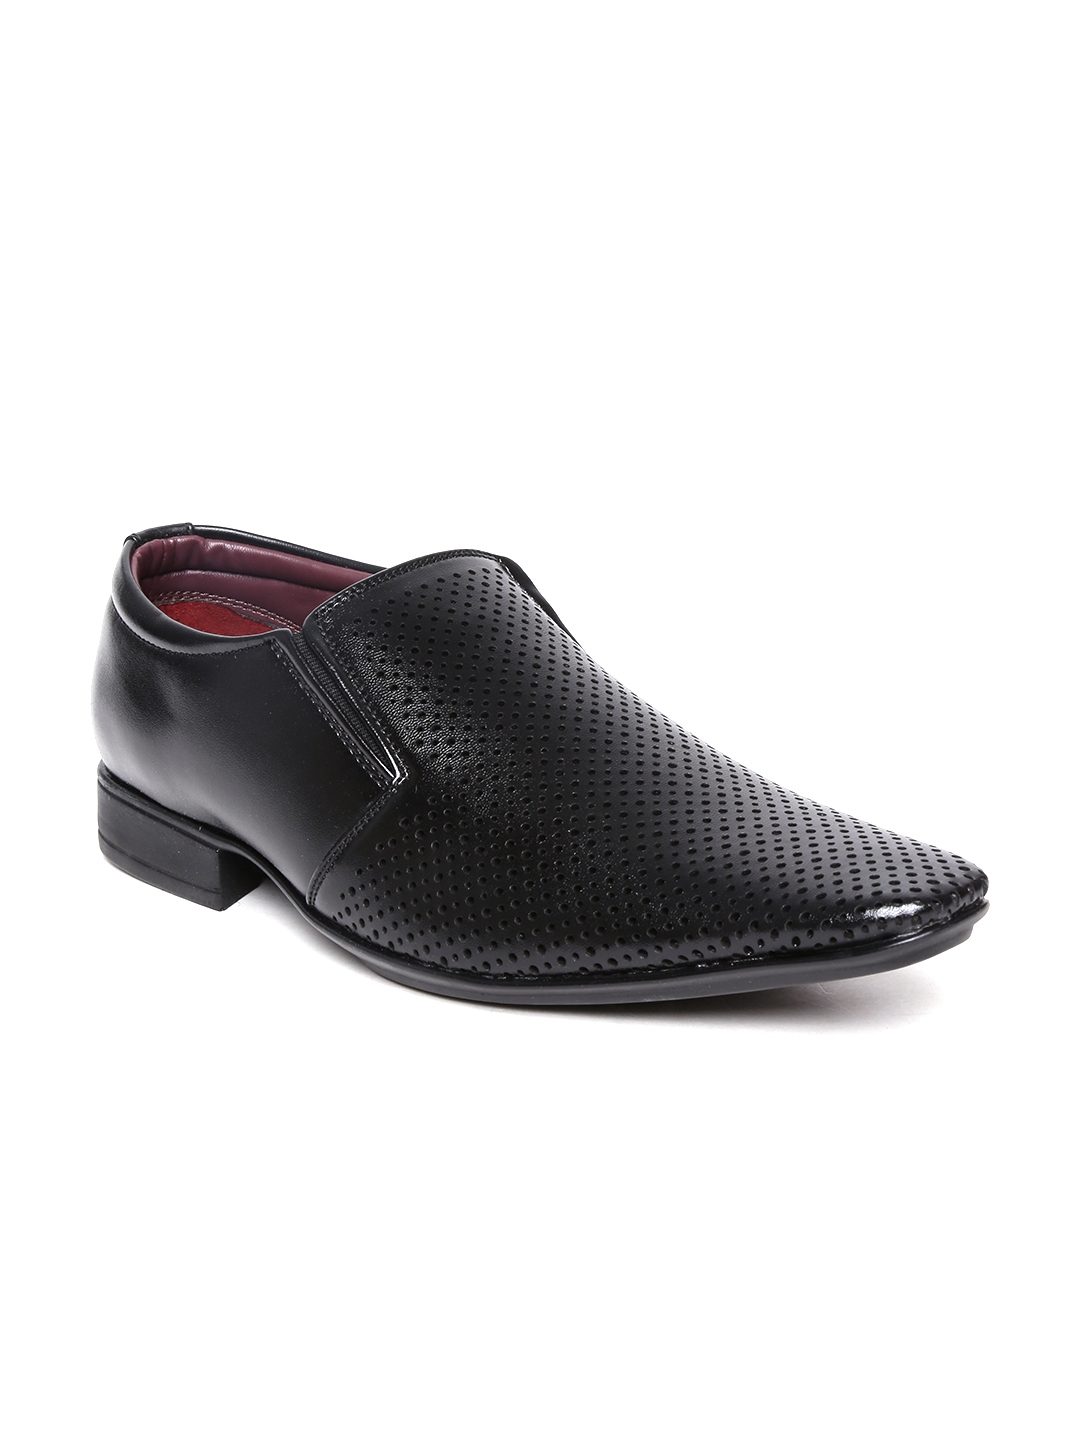 footin mens shoes